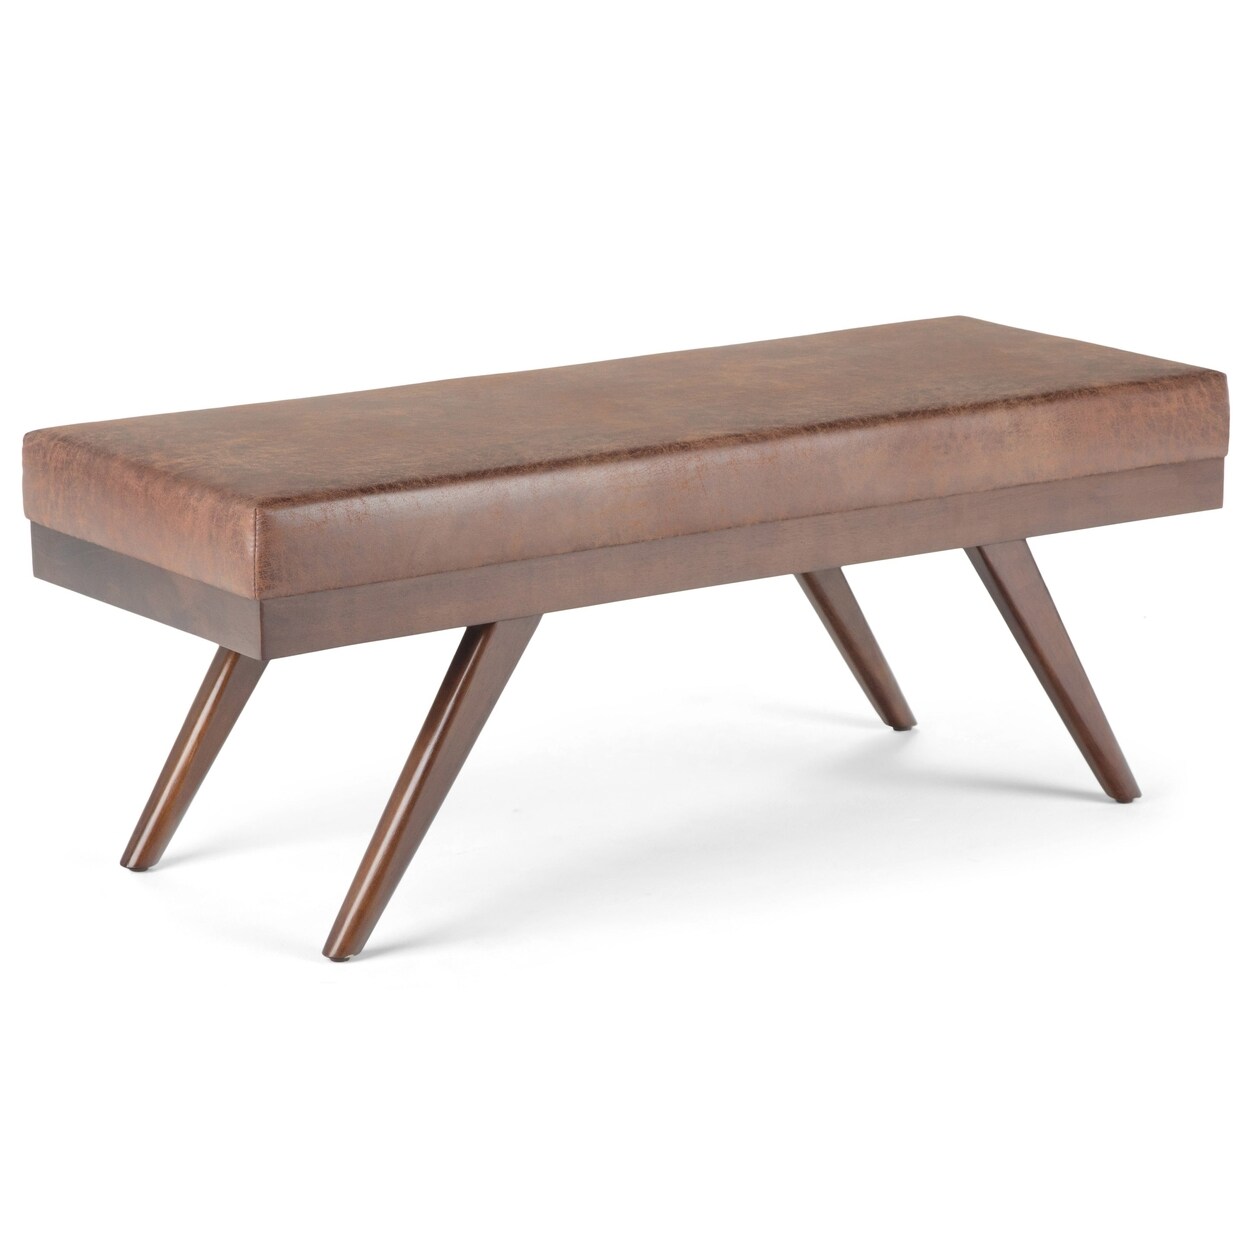 Simpli Home Chanelle Ottoman Bench in Distressed Vegan Leather